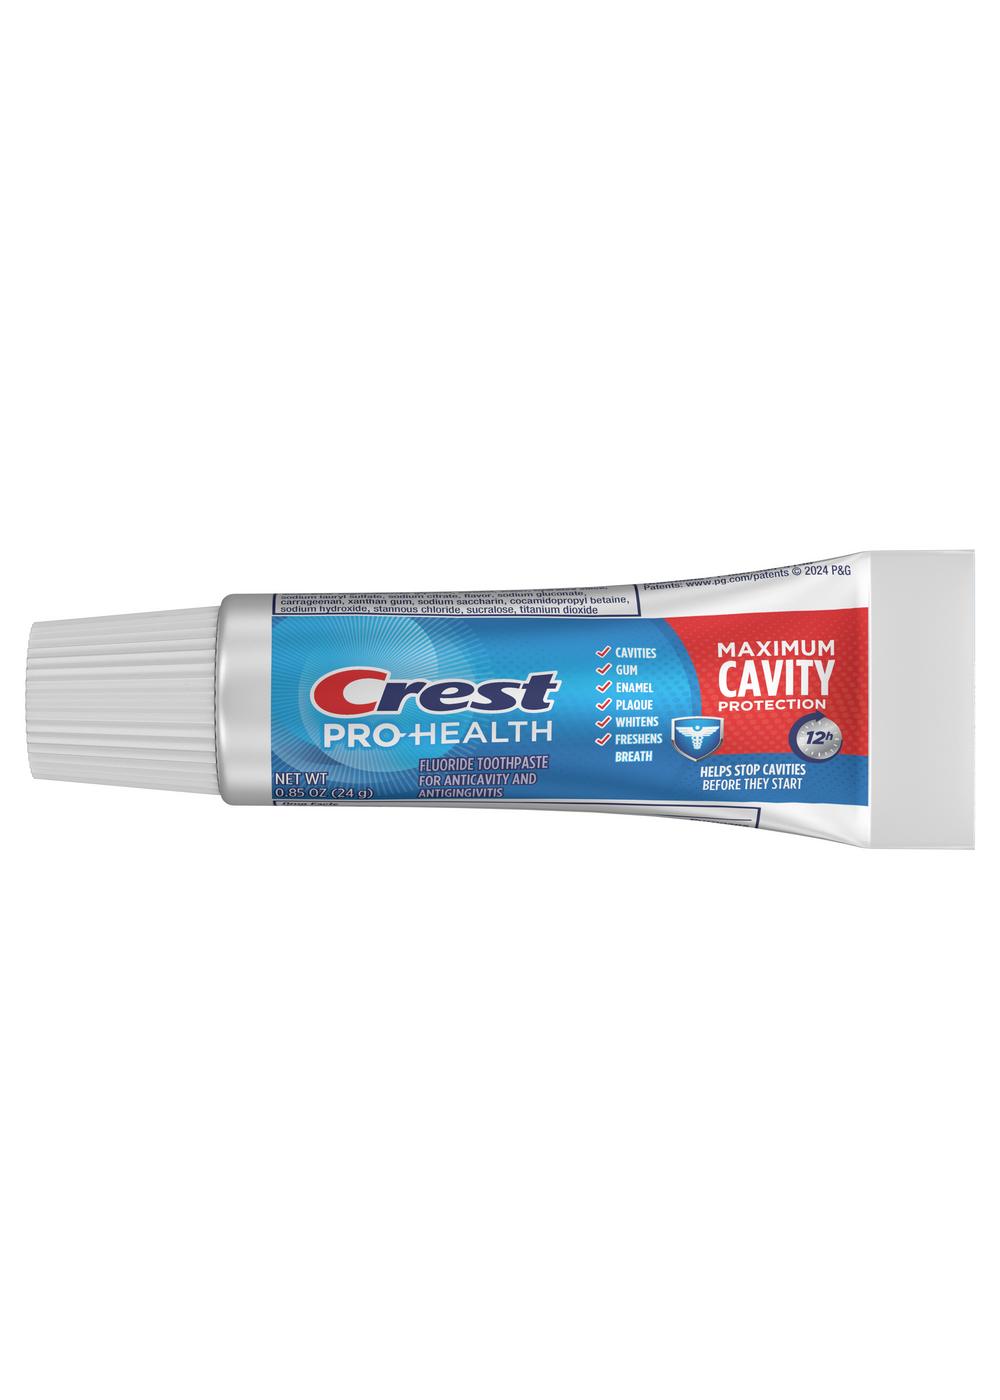 Crest Pro-Health Maximum Cavity Protection Toothpaste; image 3 of 9